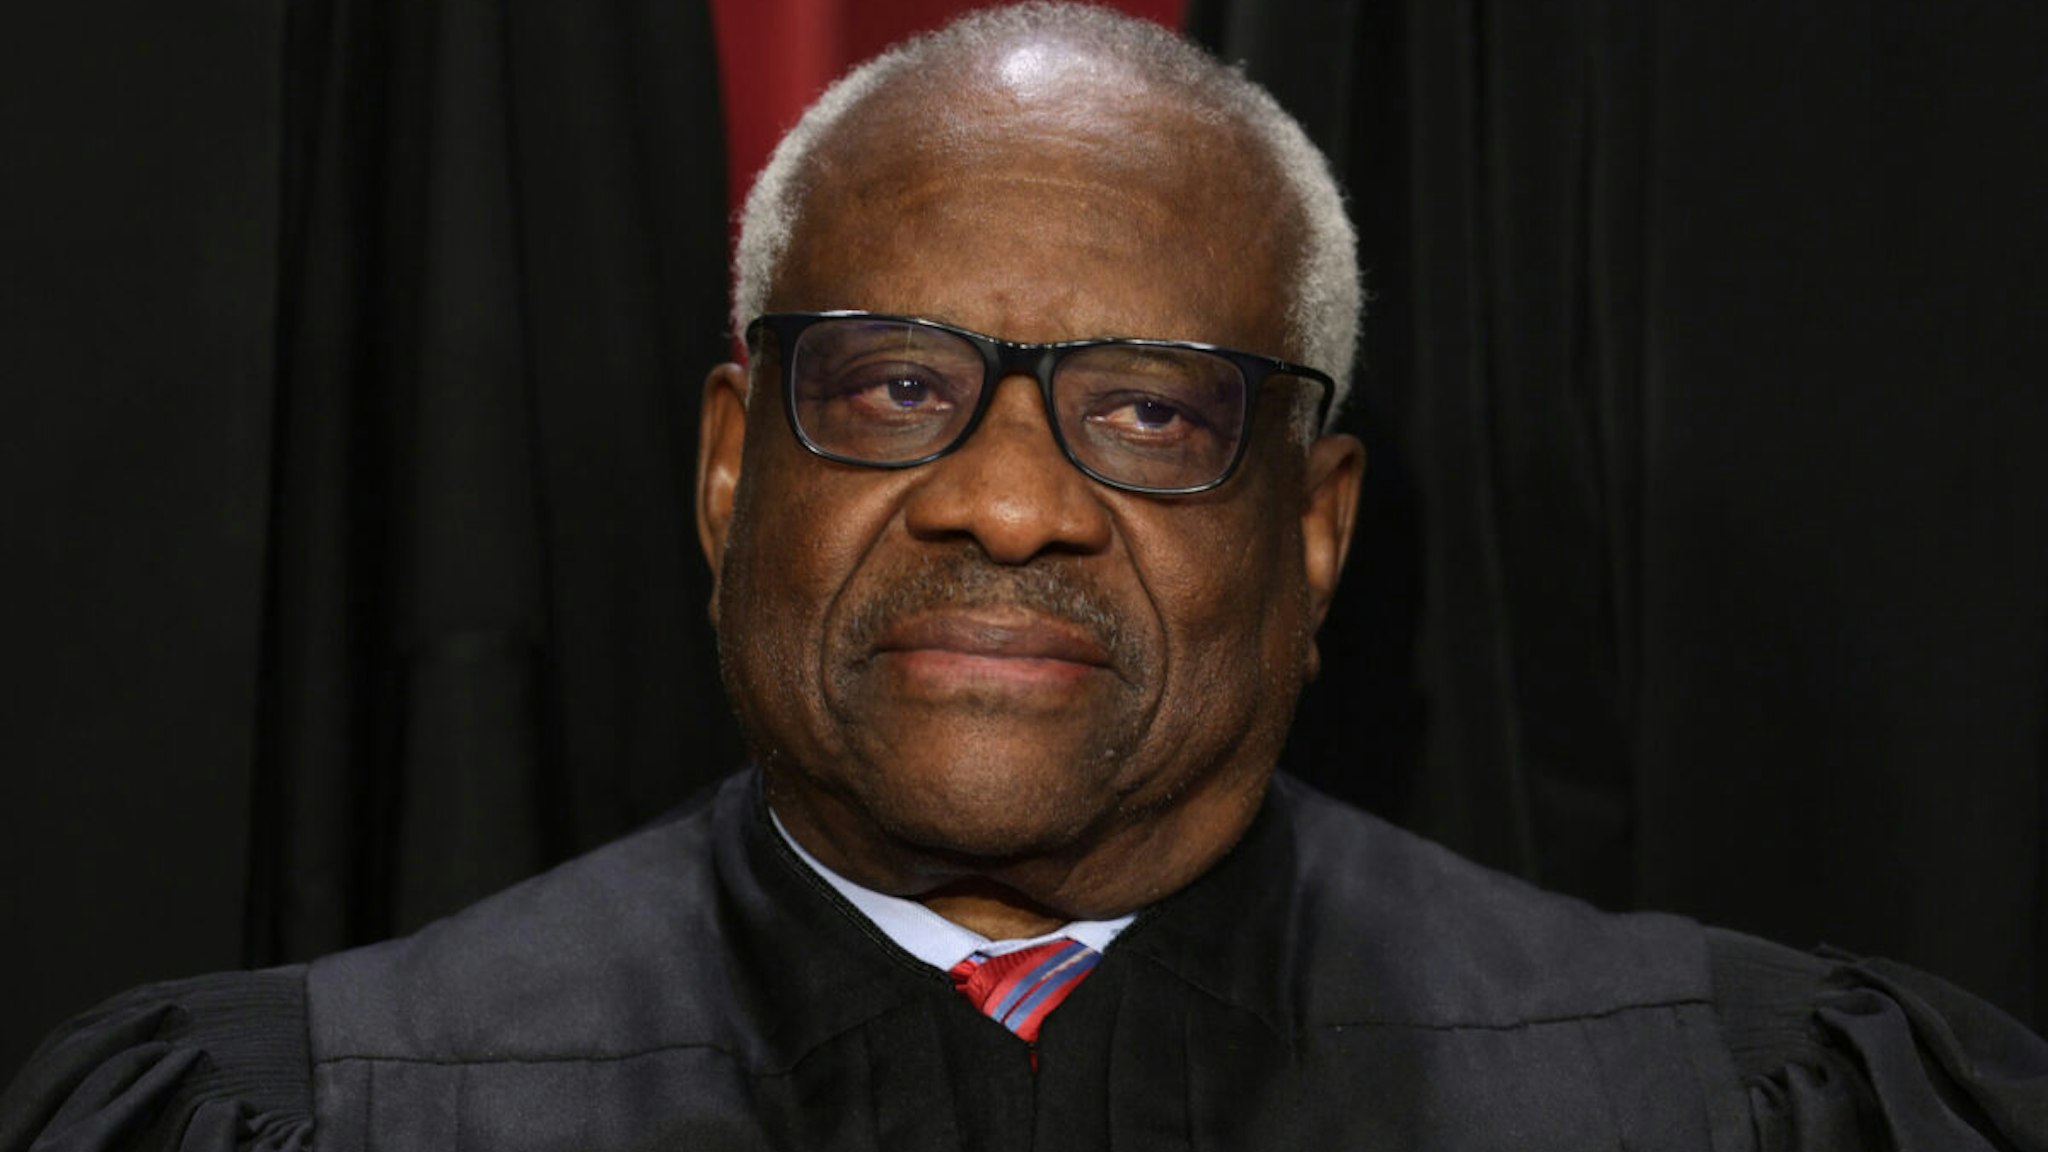 United States Supreme Court Associate Justice Clarence Thomas poses for an official portrait at the East Conference Room of the Supreme Court building on October 7, 2022 in Washington, DC.